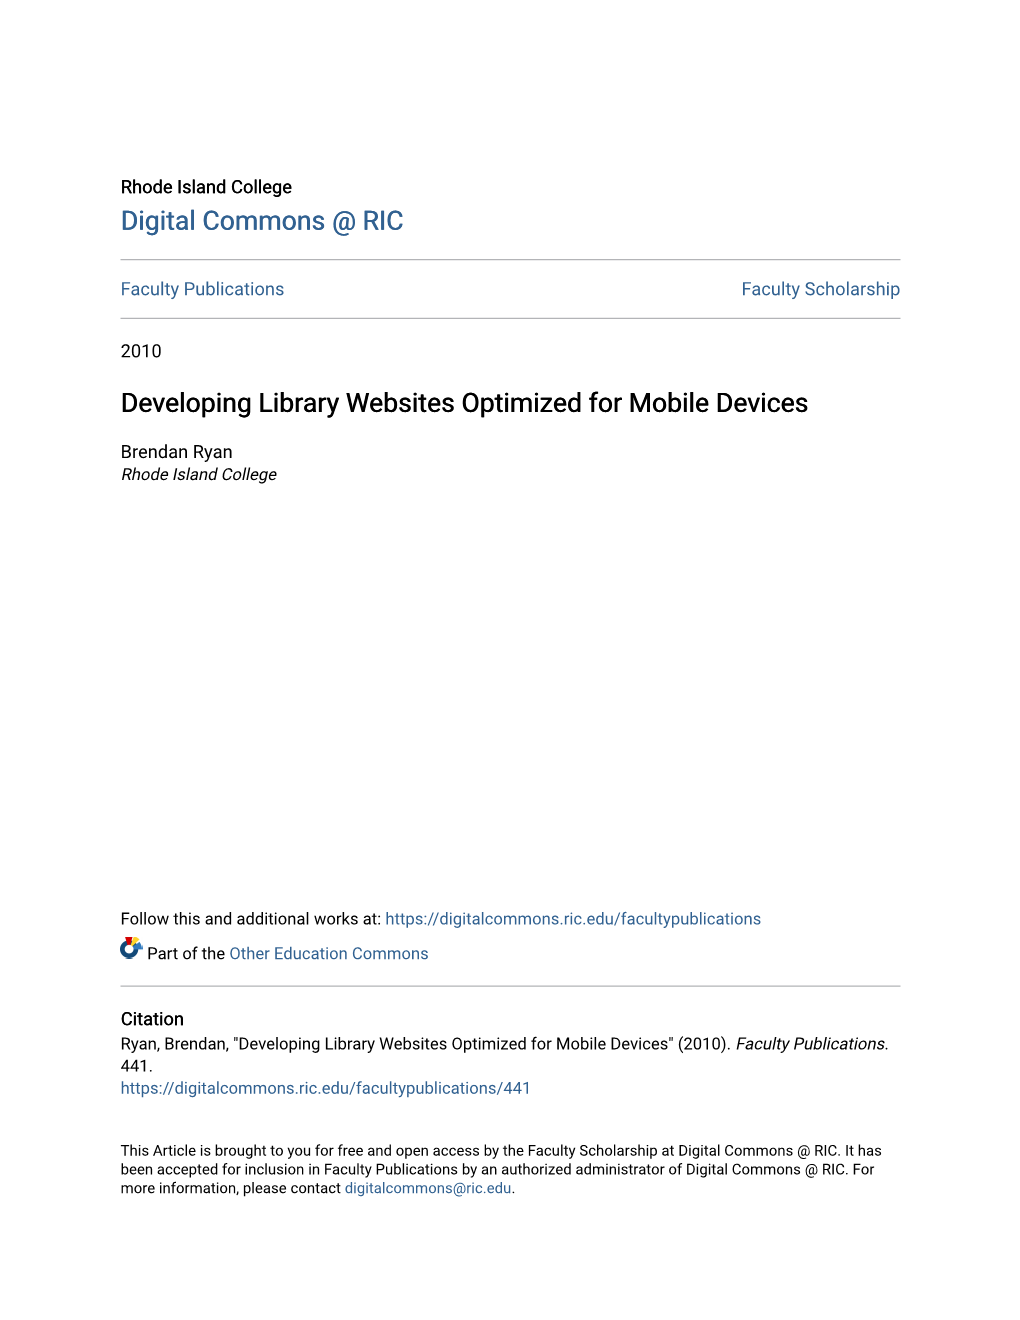 Developing Library Websites Optimized for Mobile Devices